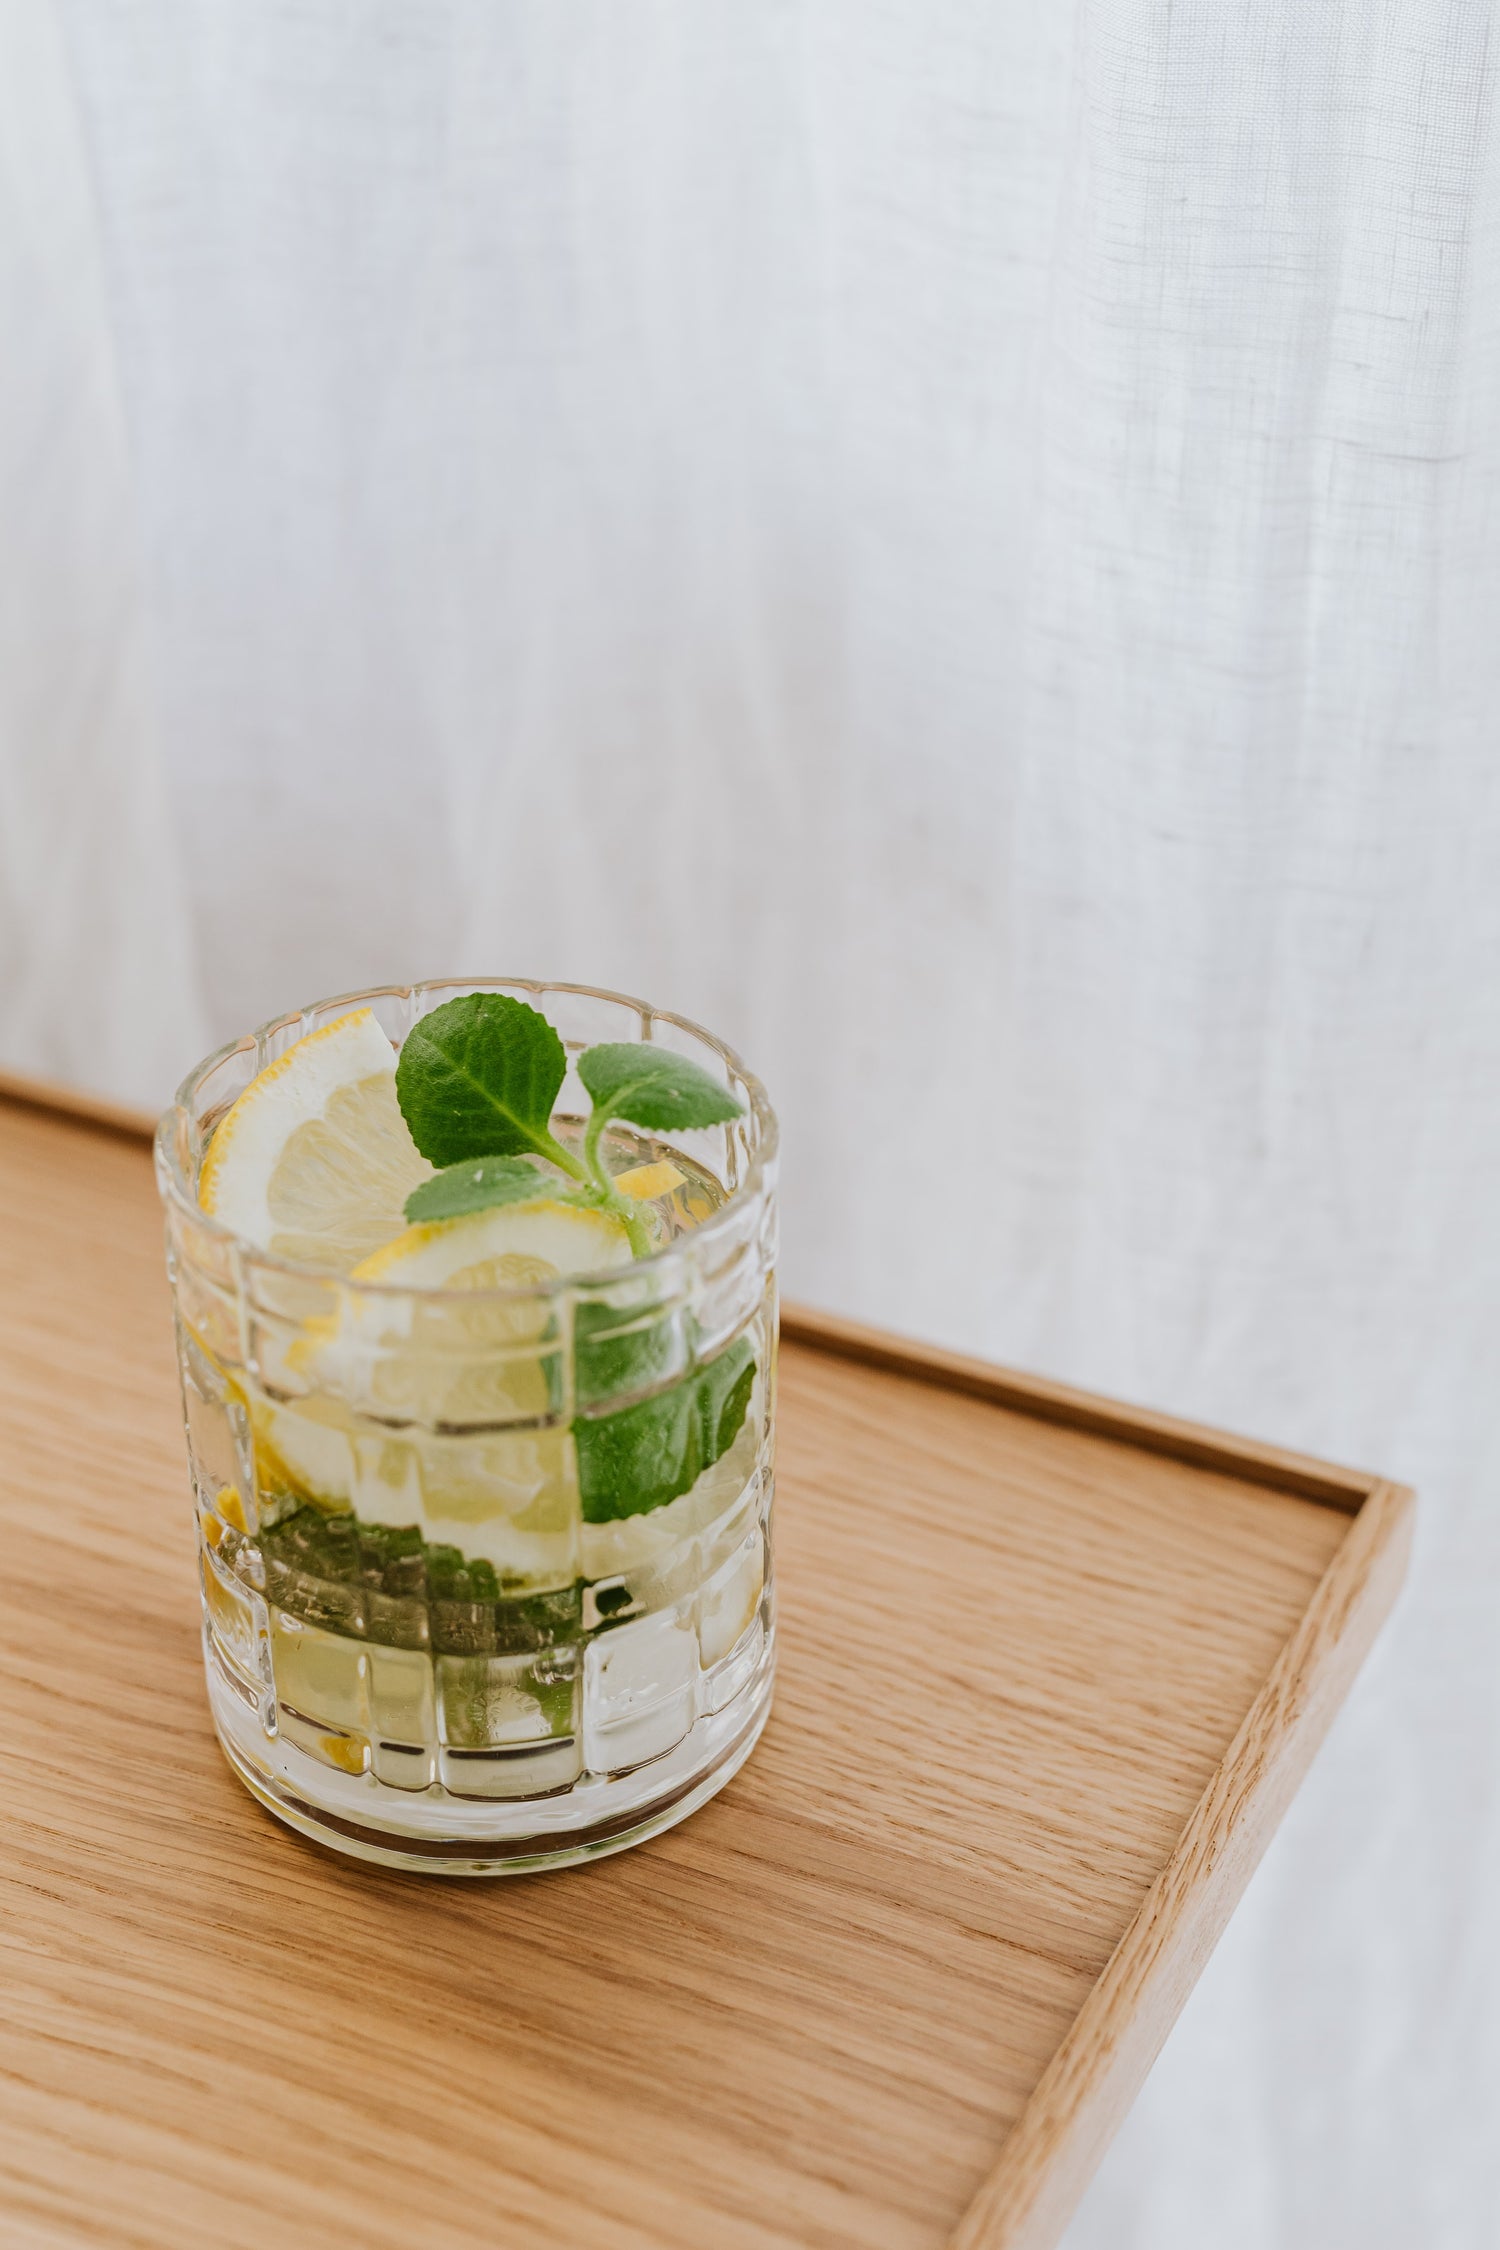 Clear cocktail glass filled with lemon and basil cocktail.